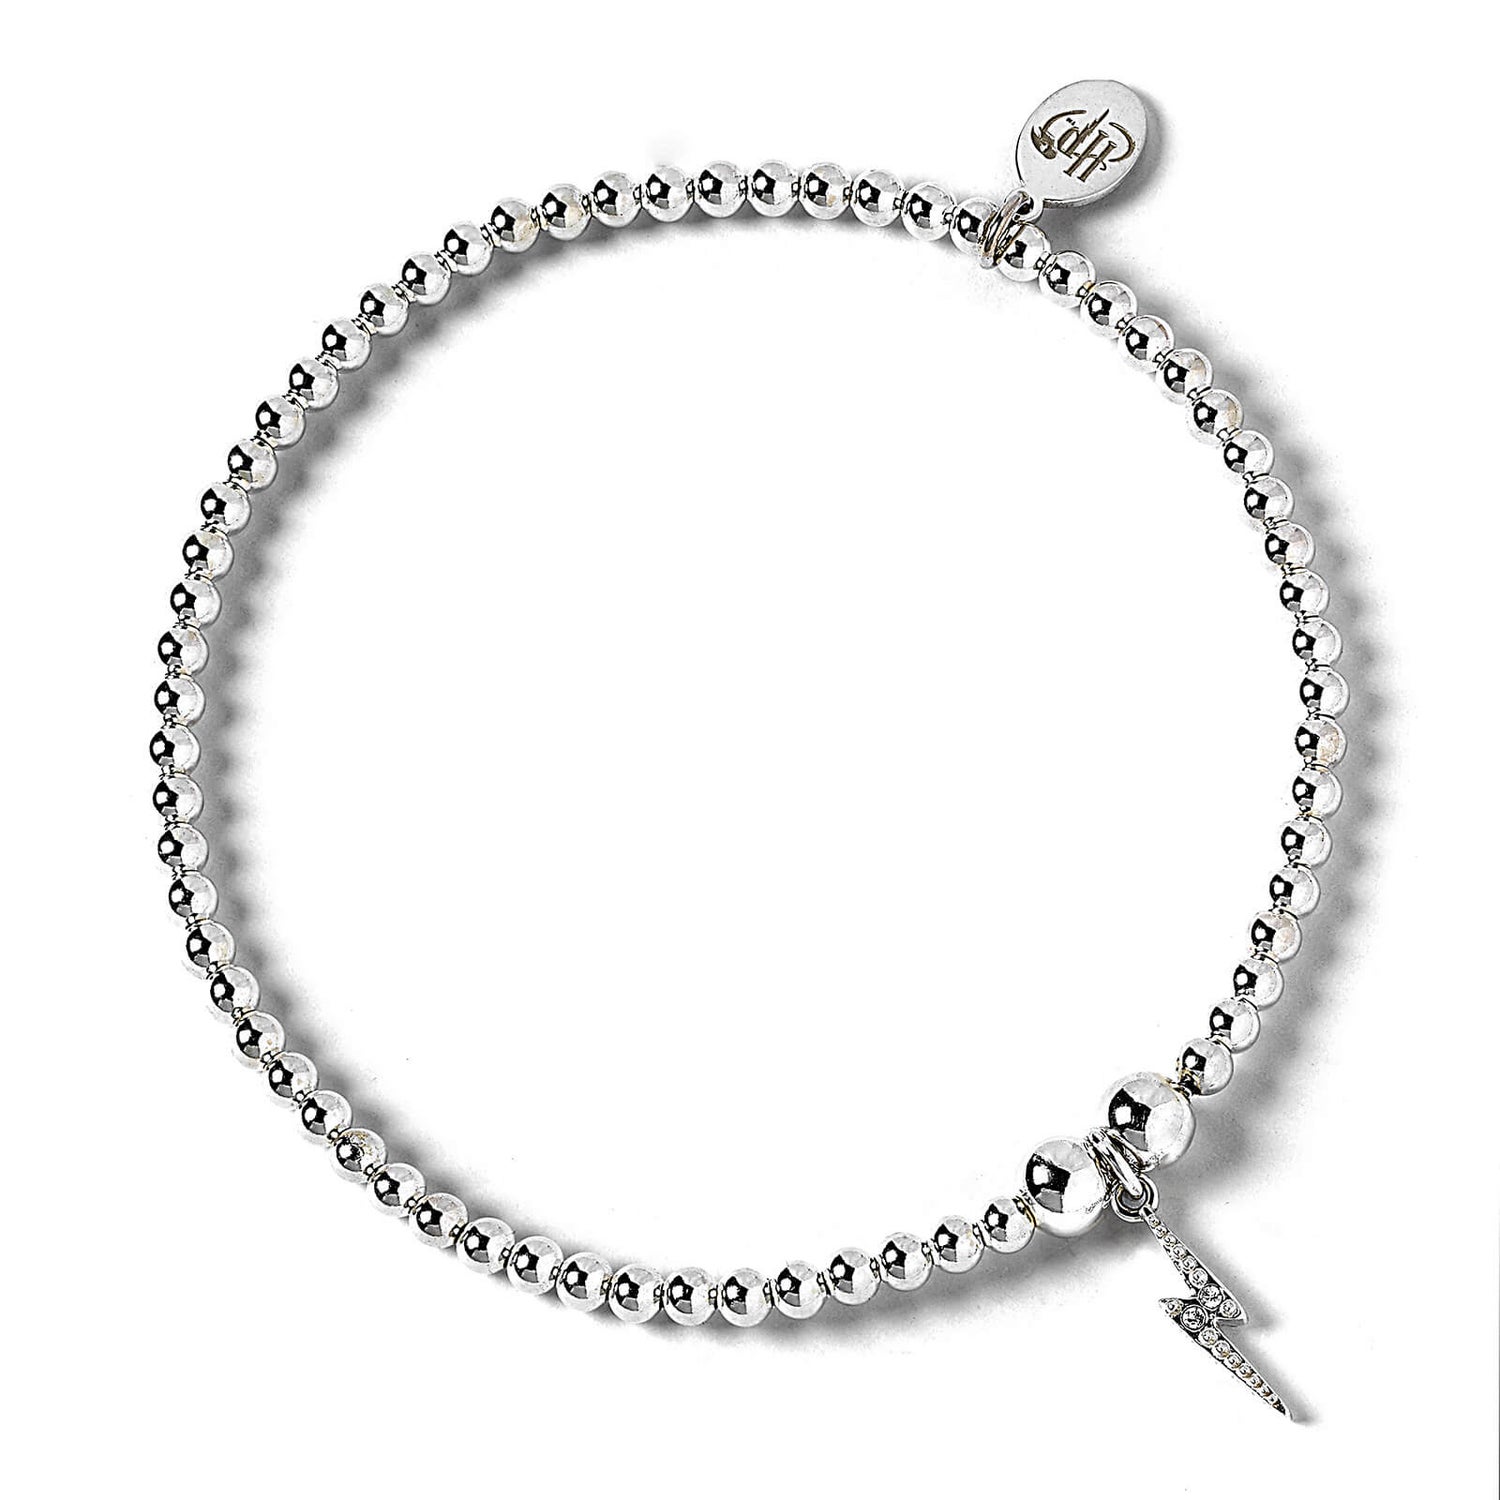 Harry Potter Ball Bead Bracelet with Lightning Bolt Scar Charm Embellished with Crystals - Sterling Silver